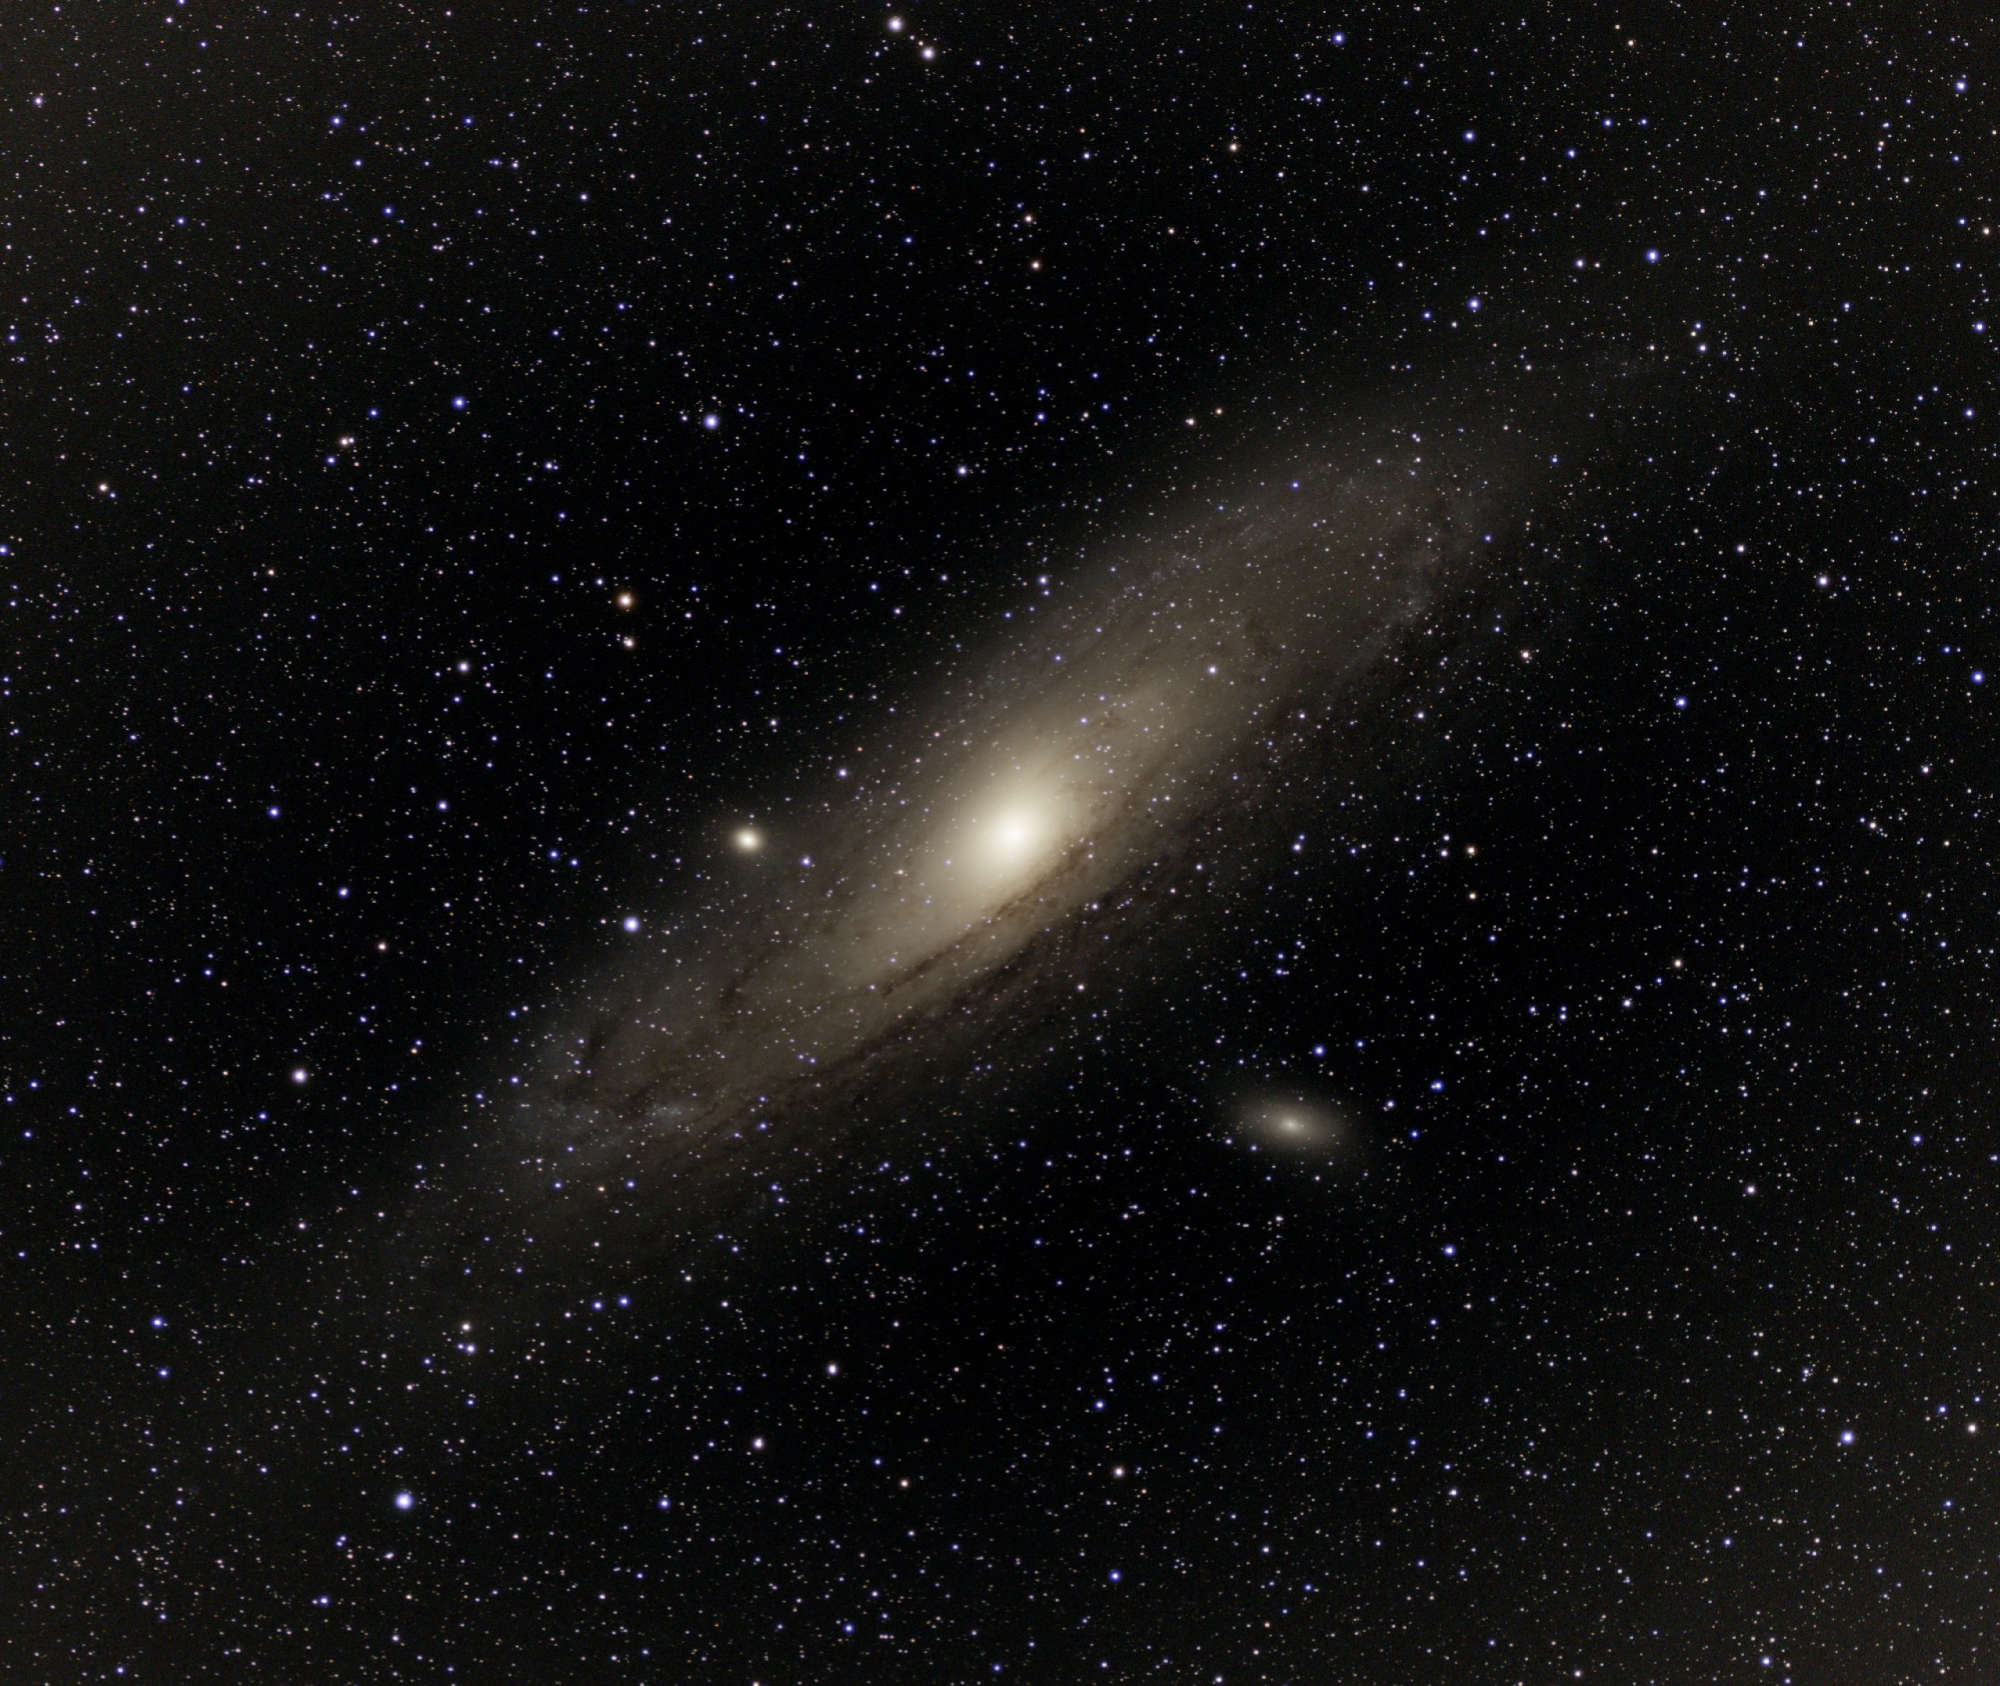 M31 observed with Vespera 2 and live panorama mode